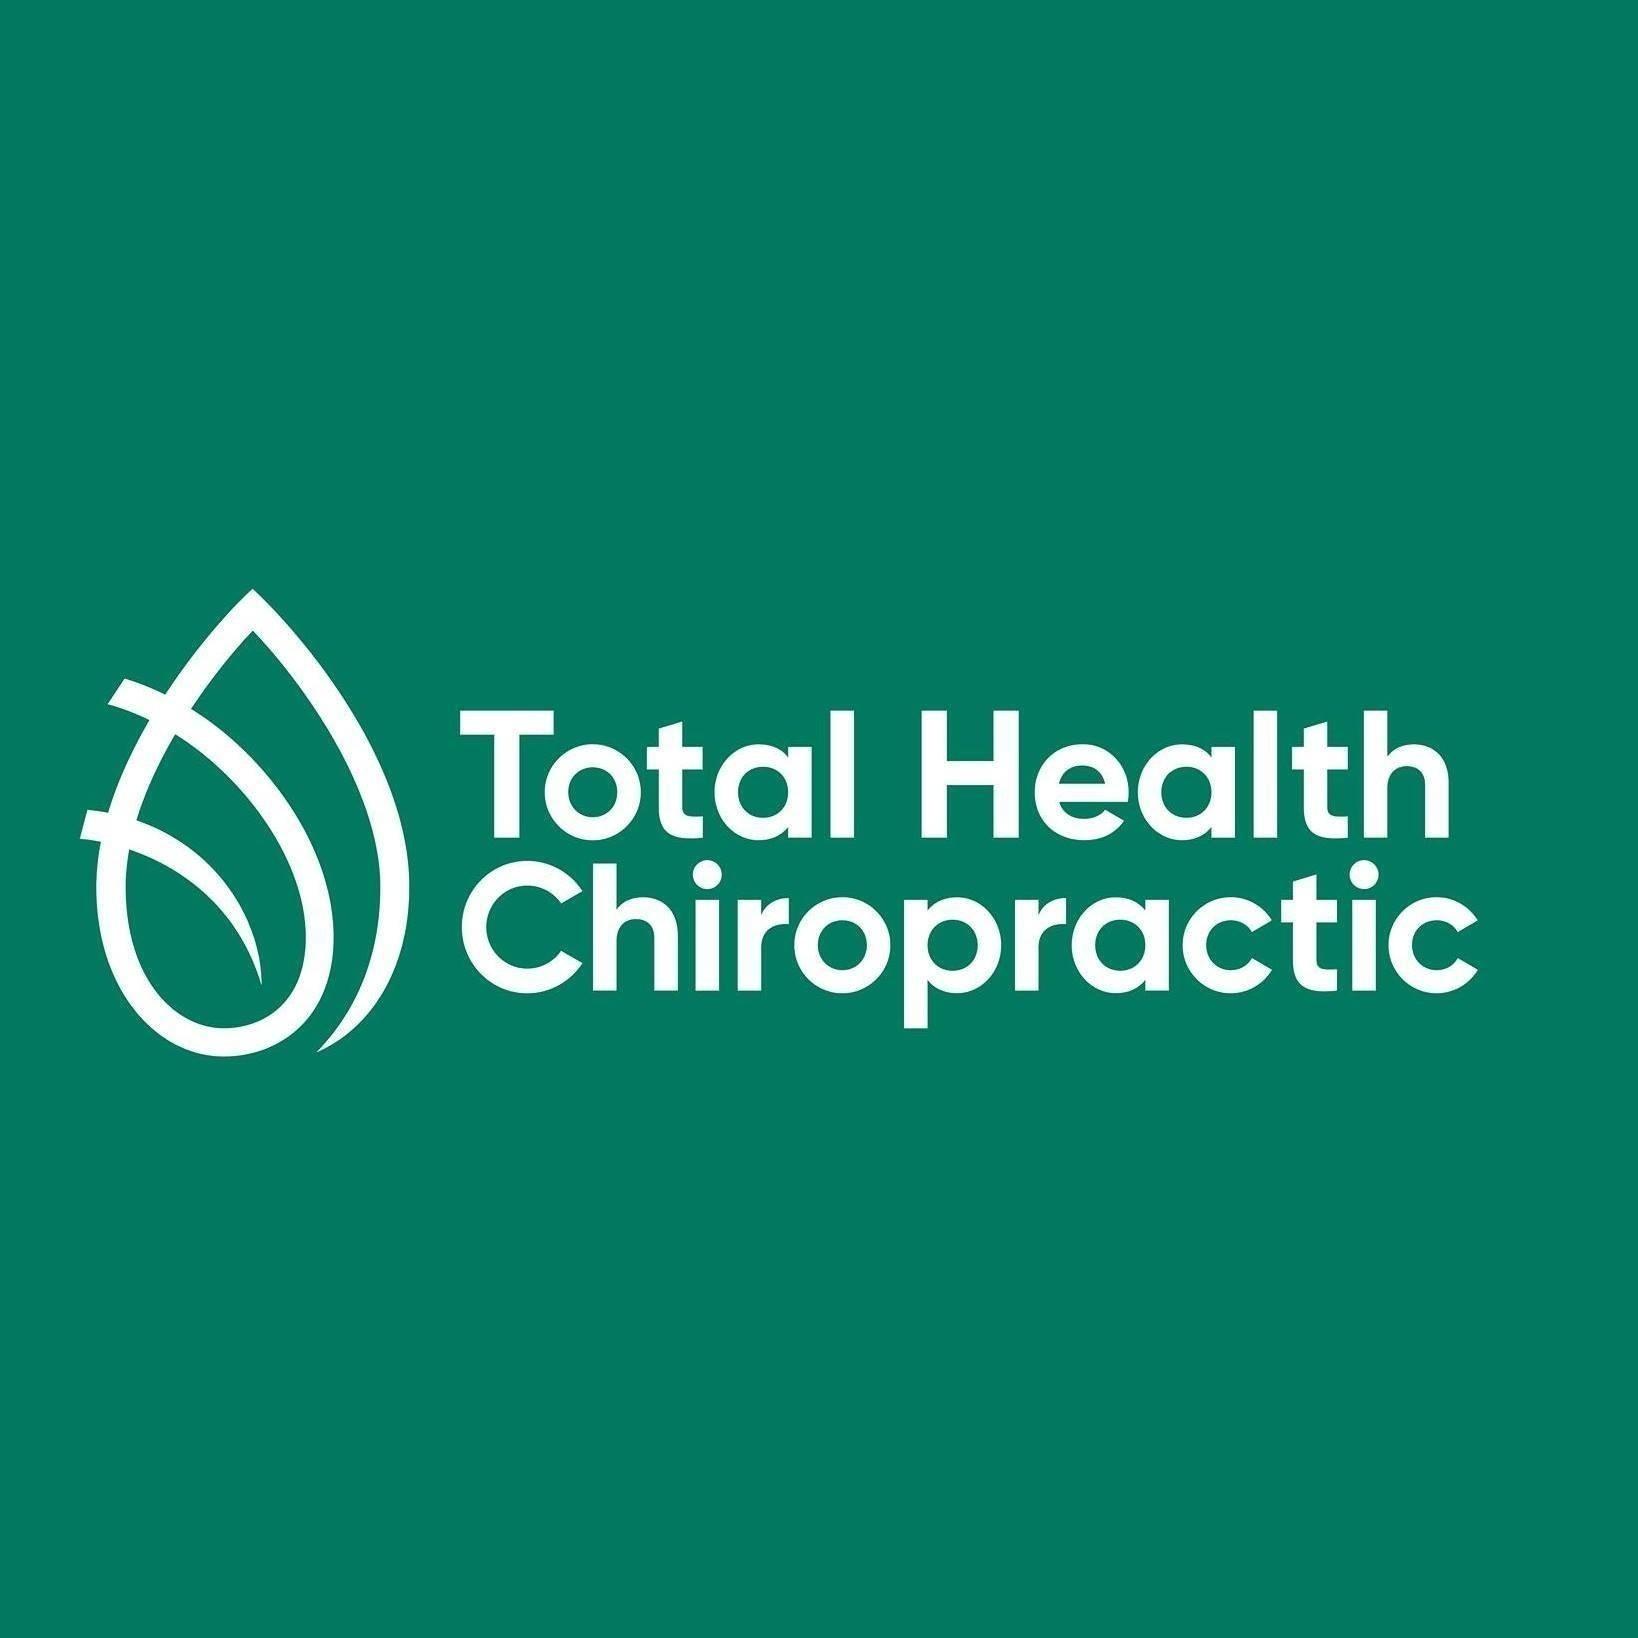 Total Health Chiropractic Gympie - Gympie, QLD 4570 - (07) 5201 1210 | ShowMeLocal.com